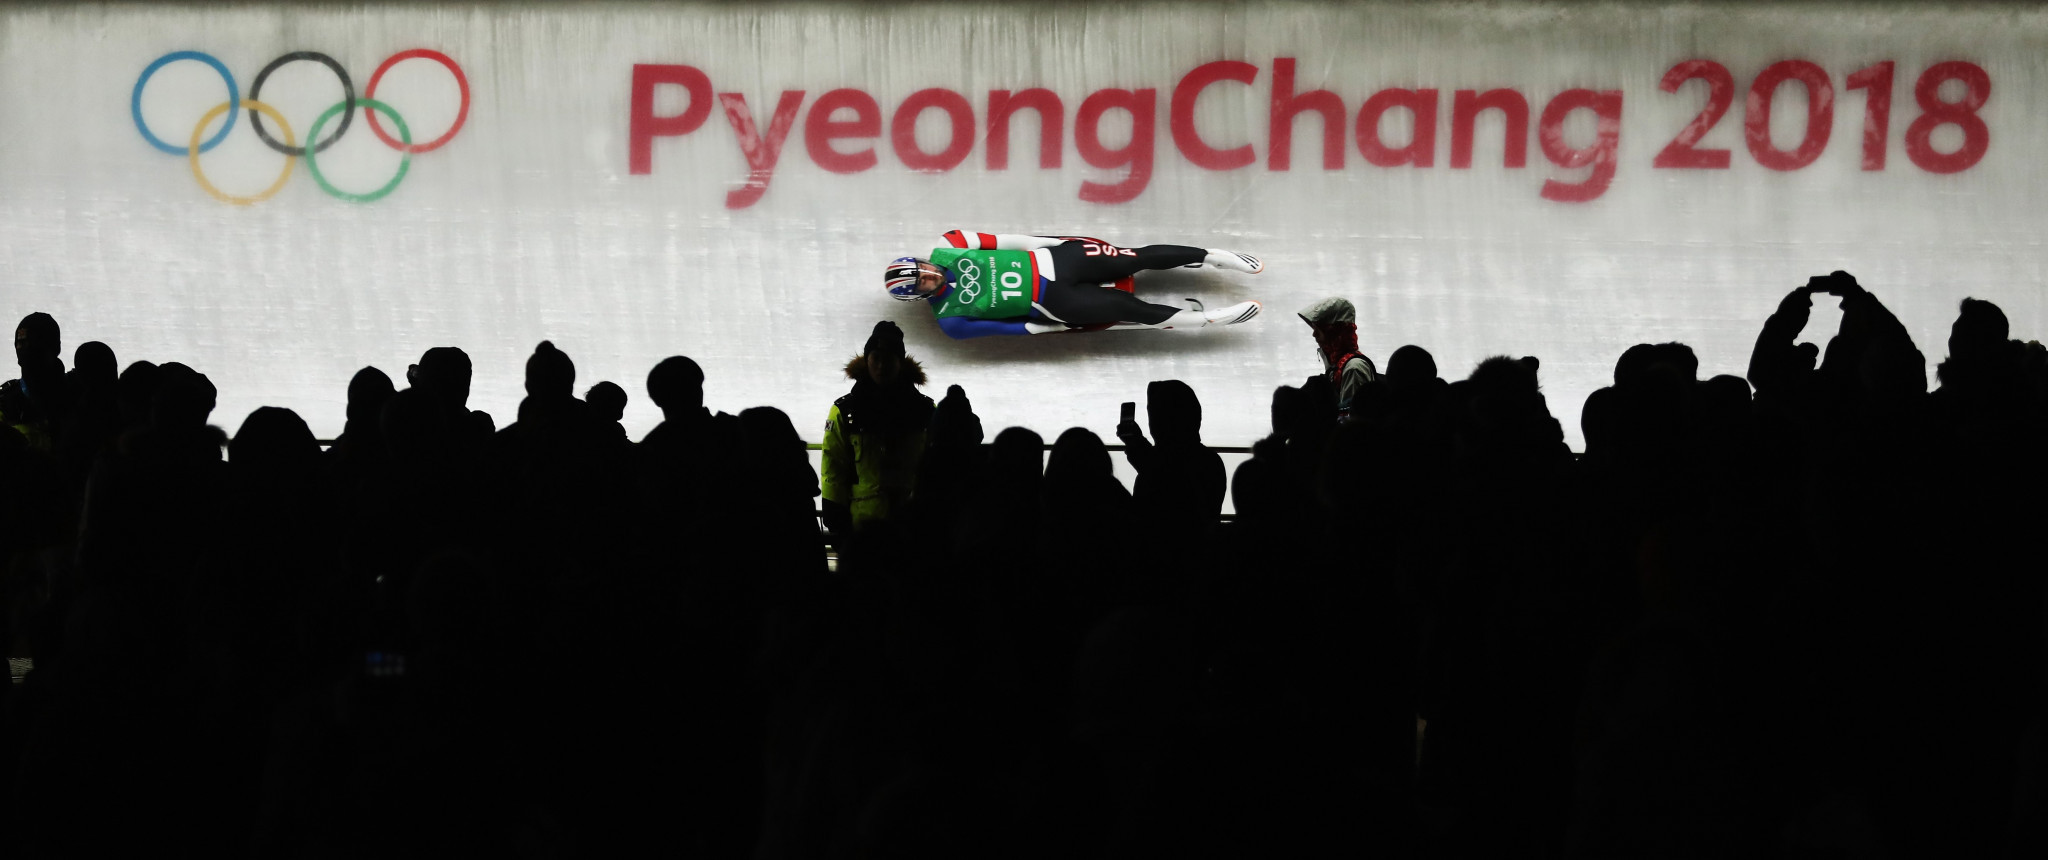 Chris Mazdzer won the United Sates' lone luge medal at Pyeongchang 2018 ©Getty Images